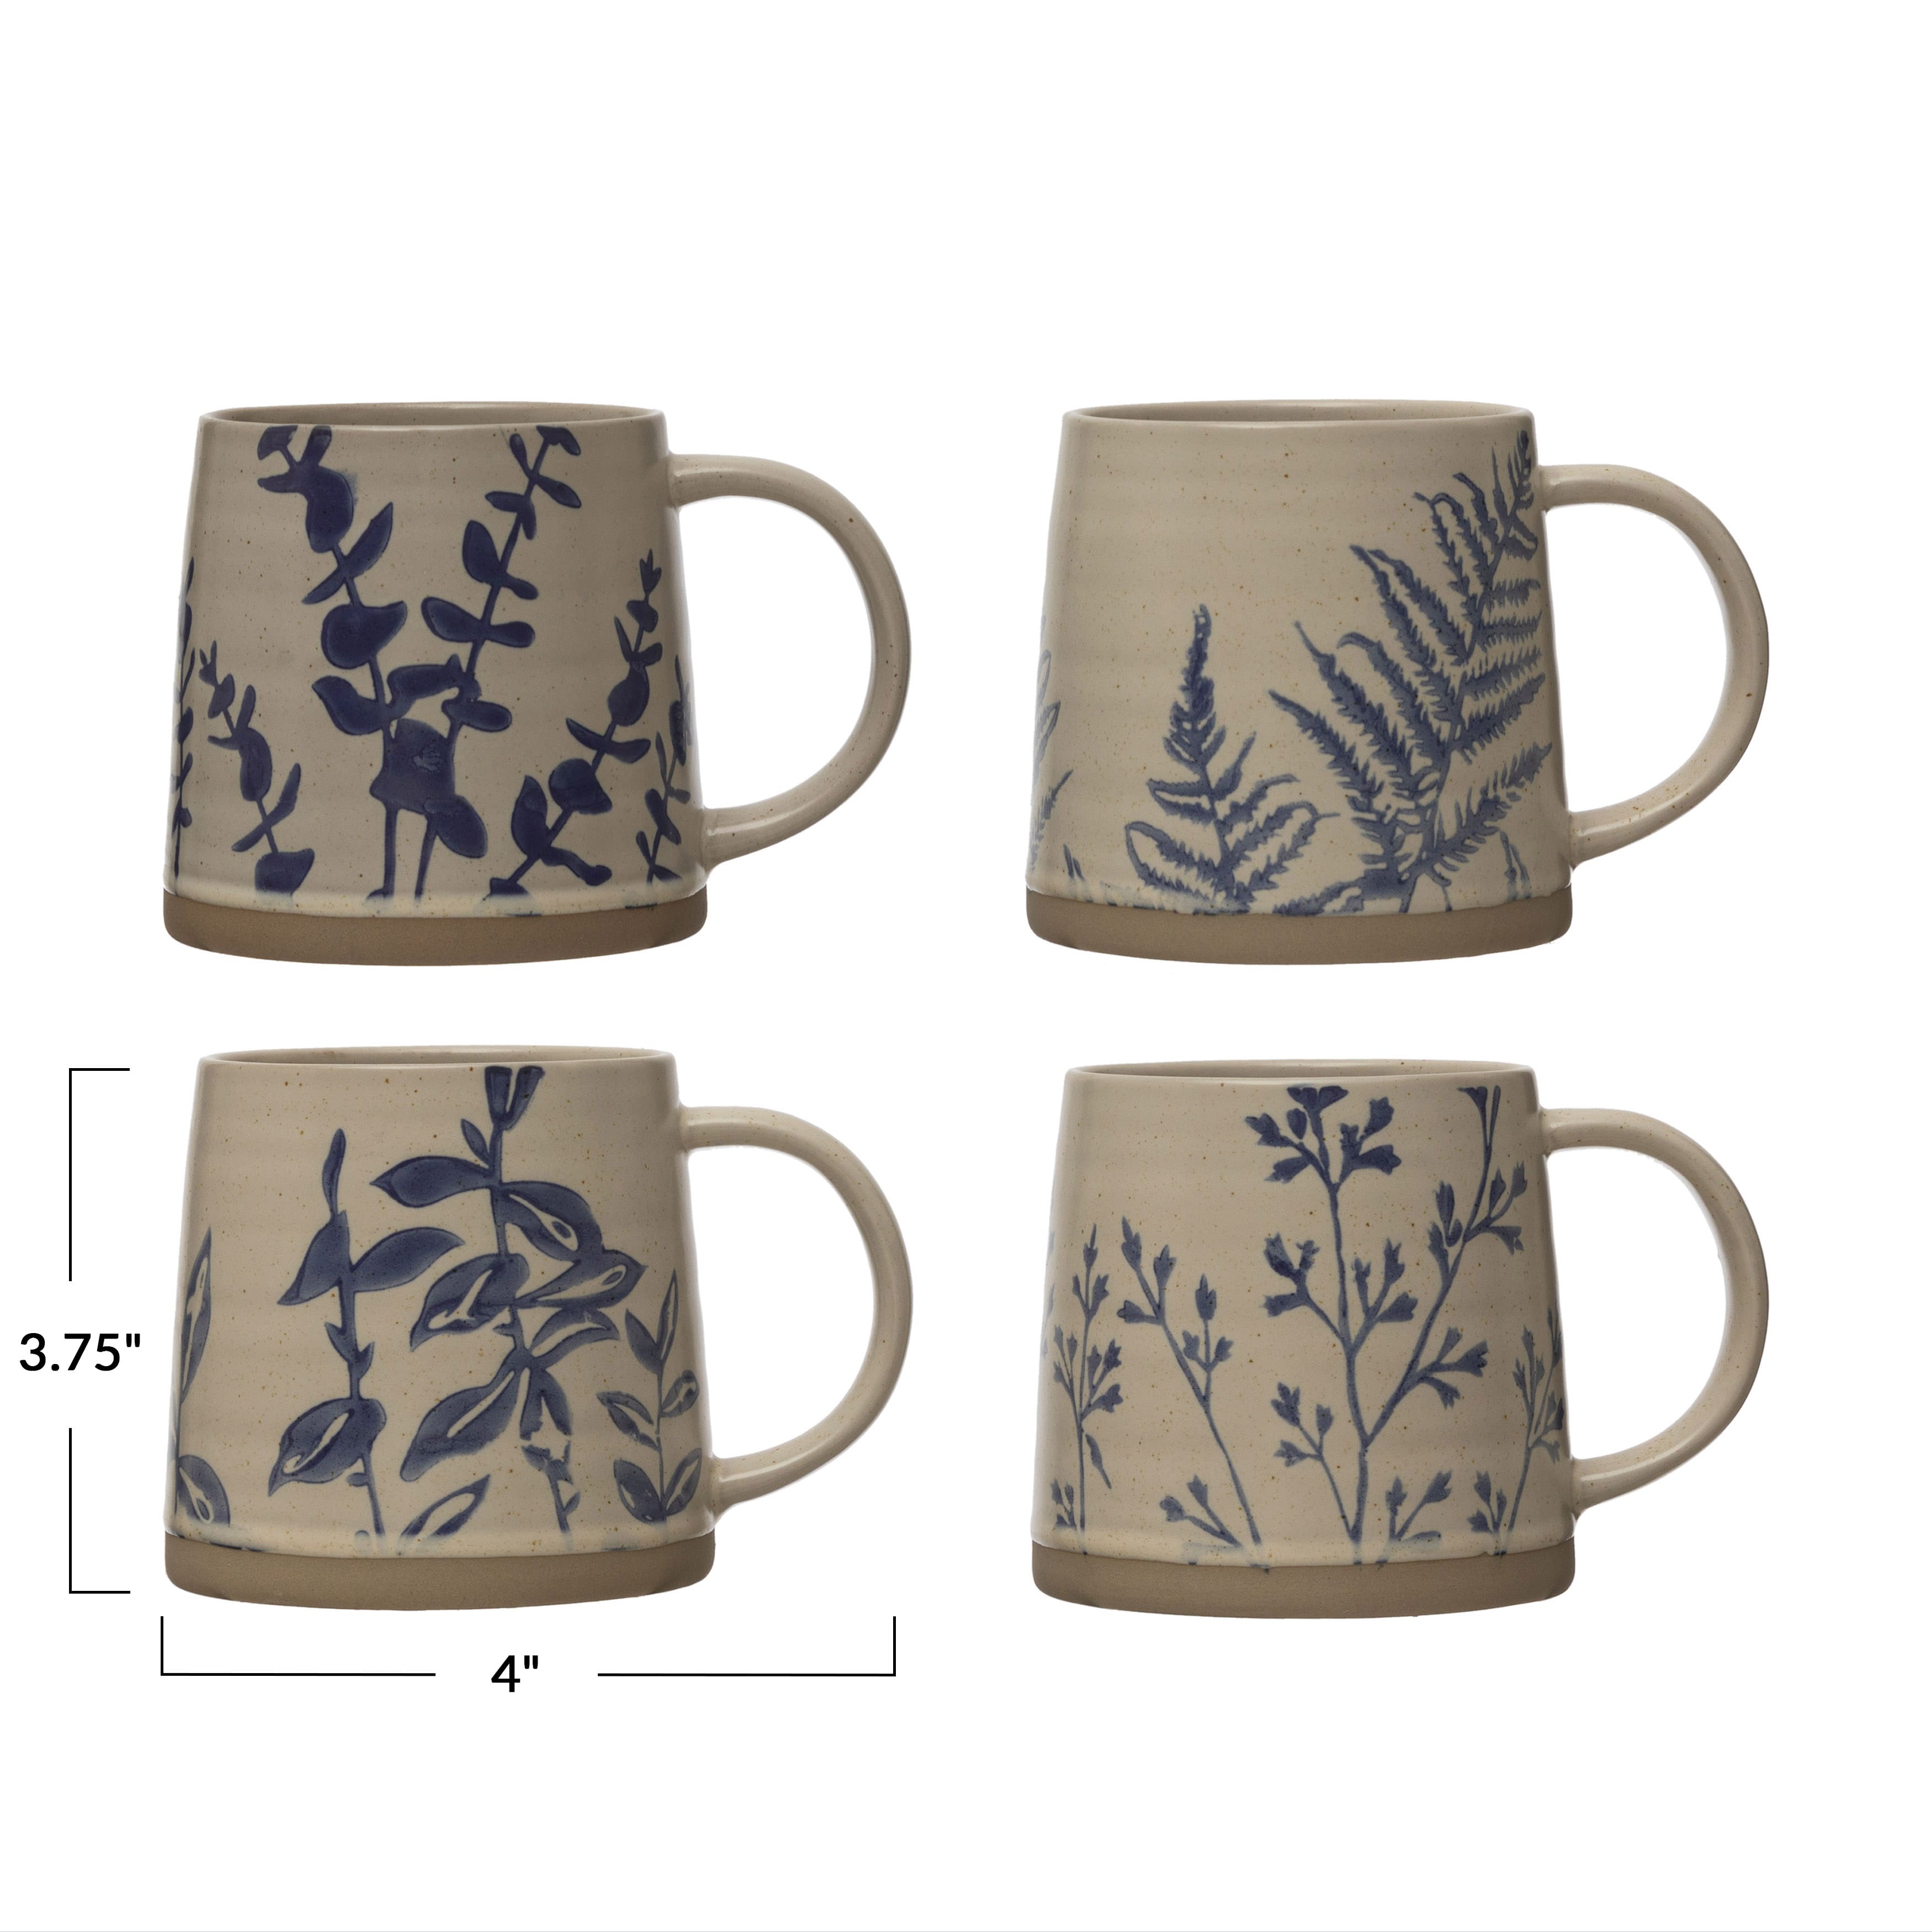 16oz. Antique Blue and White Hand Stamped Stoneware Mug Set with Wax Relief Botanical Design